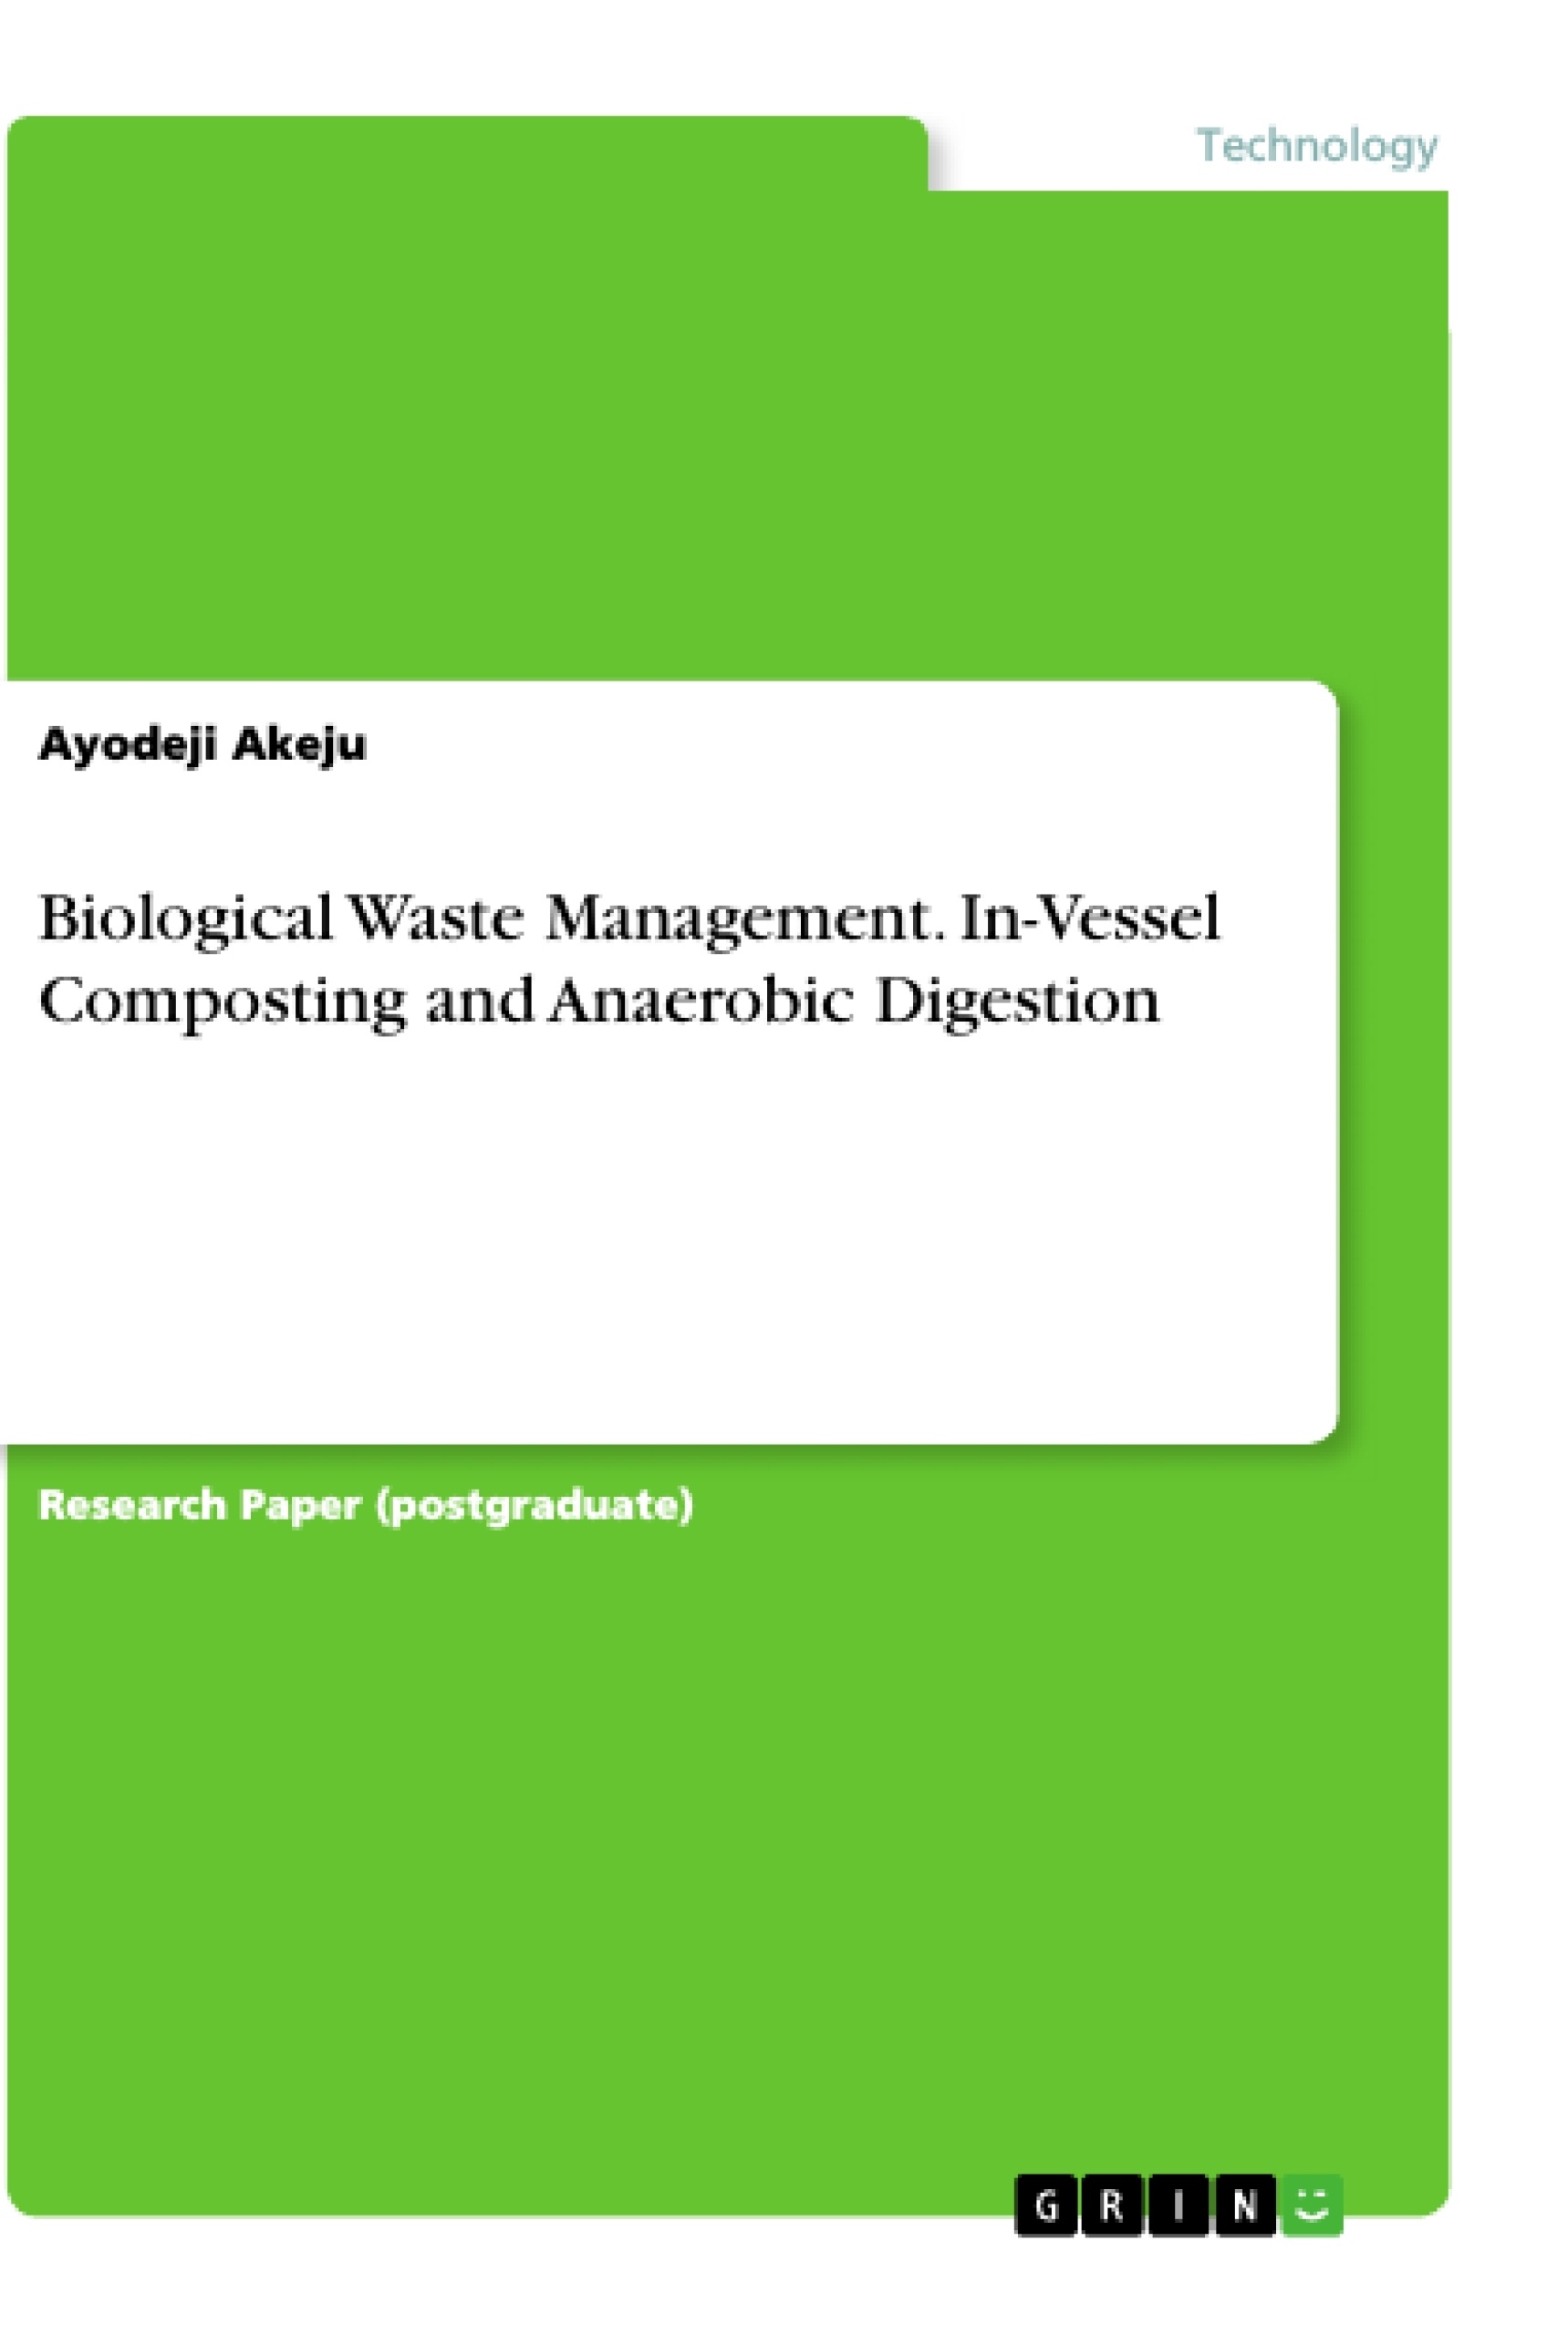 Título: Biological Waste Management. In-Vessel Composting and Anaerobic Digestion